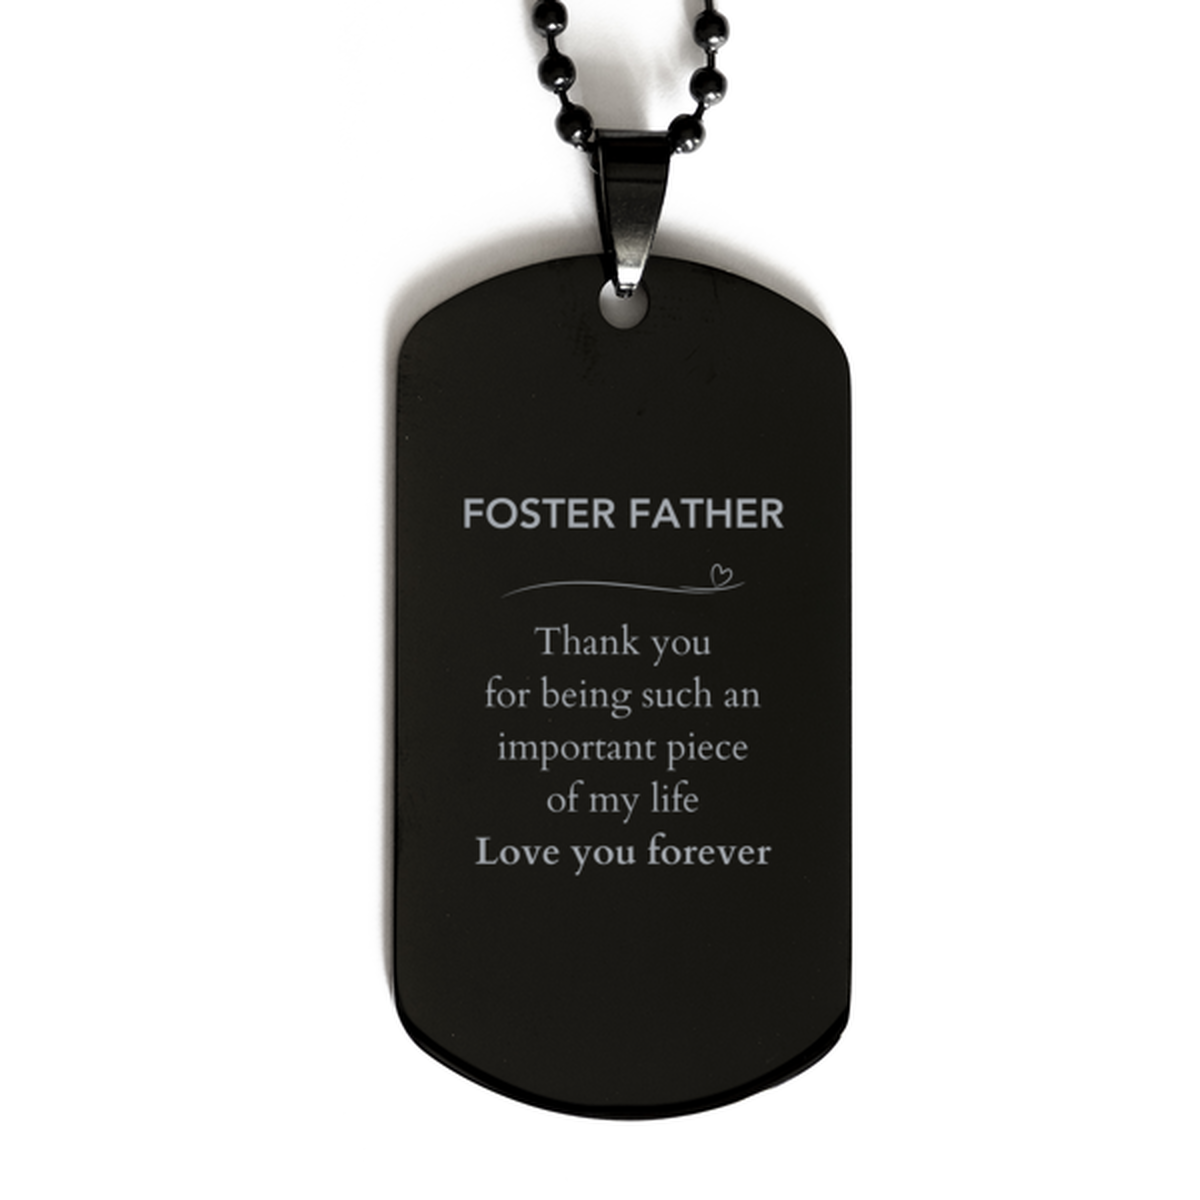 Appropriate Foster Father Black Dog Tag Epic Birthday Gifts for Foster Father Thank you for being such an important piece of my life Foster Father Christmas Mothers Fathers Day